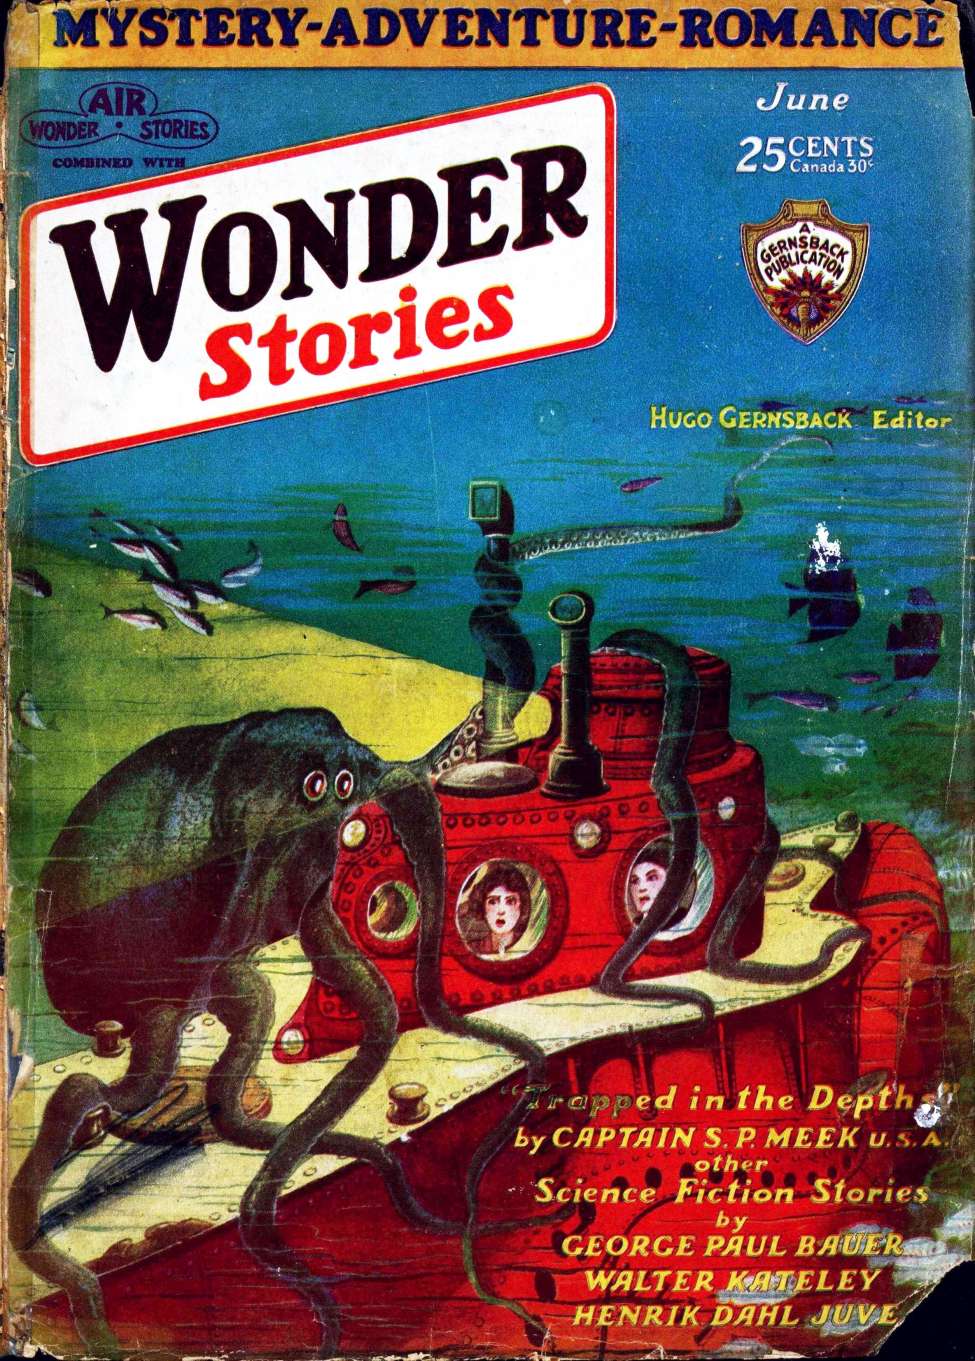 Book Cover For Wonder Stories v2 1 - A Subterranean Adventure - George Paul Bauer